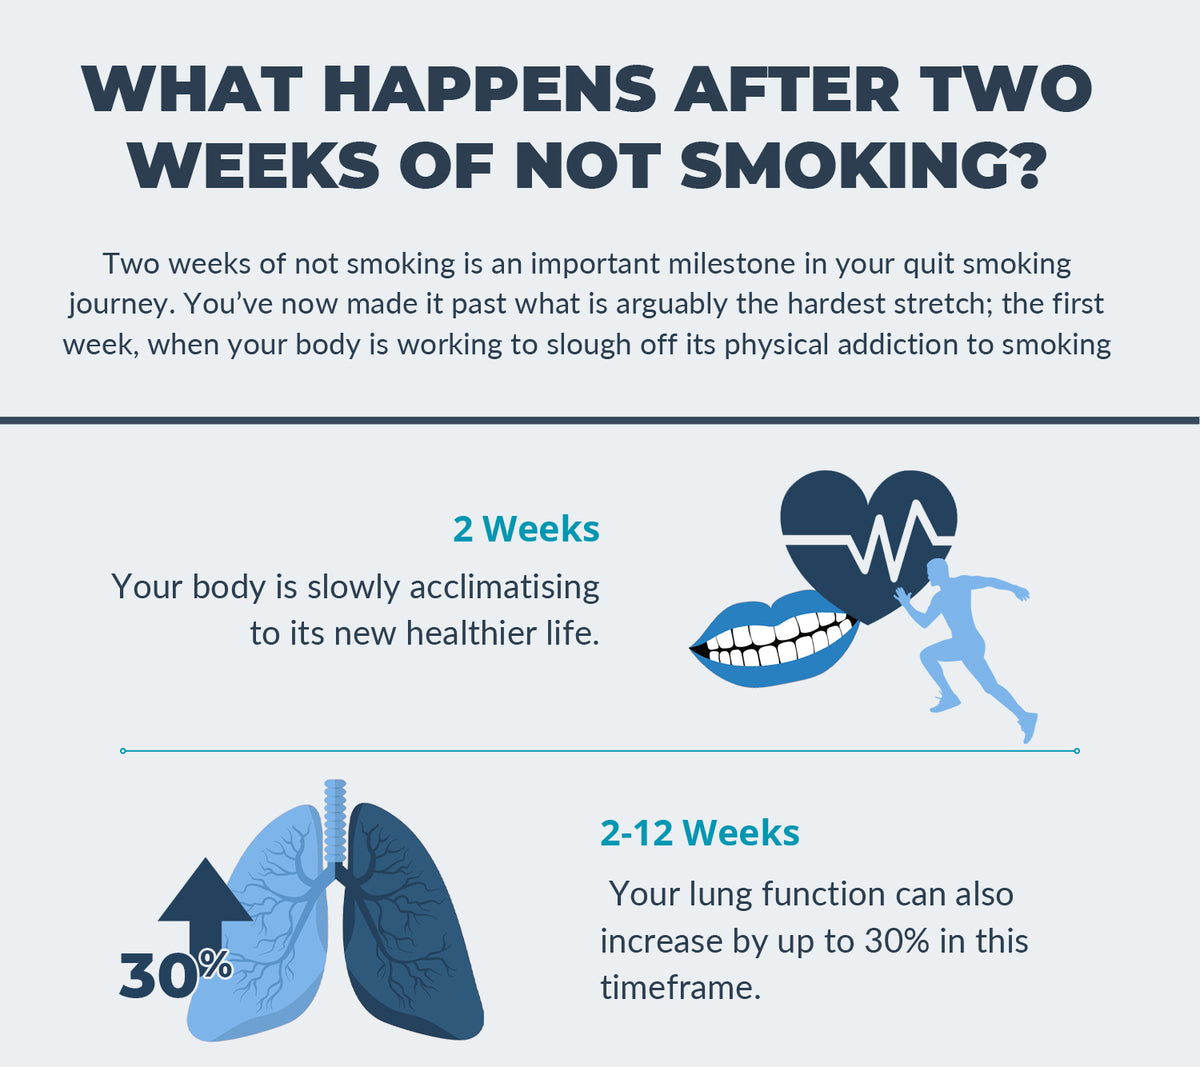 What Happens After Two Weeks of Not Smoking?